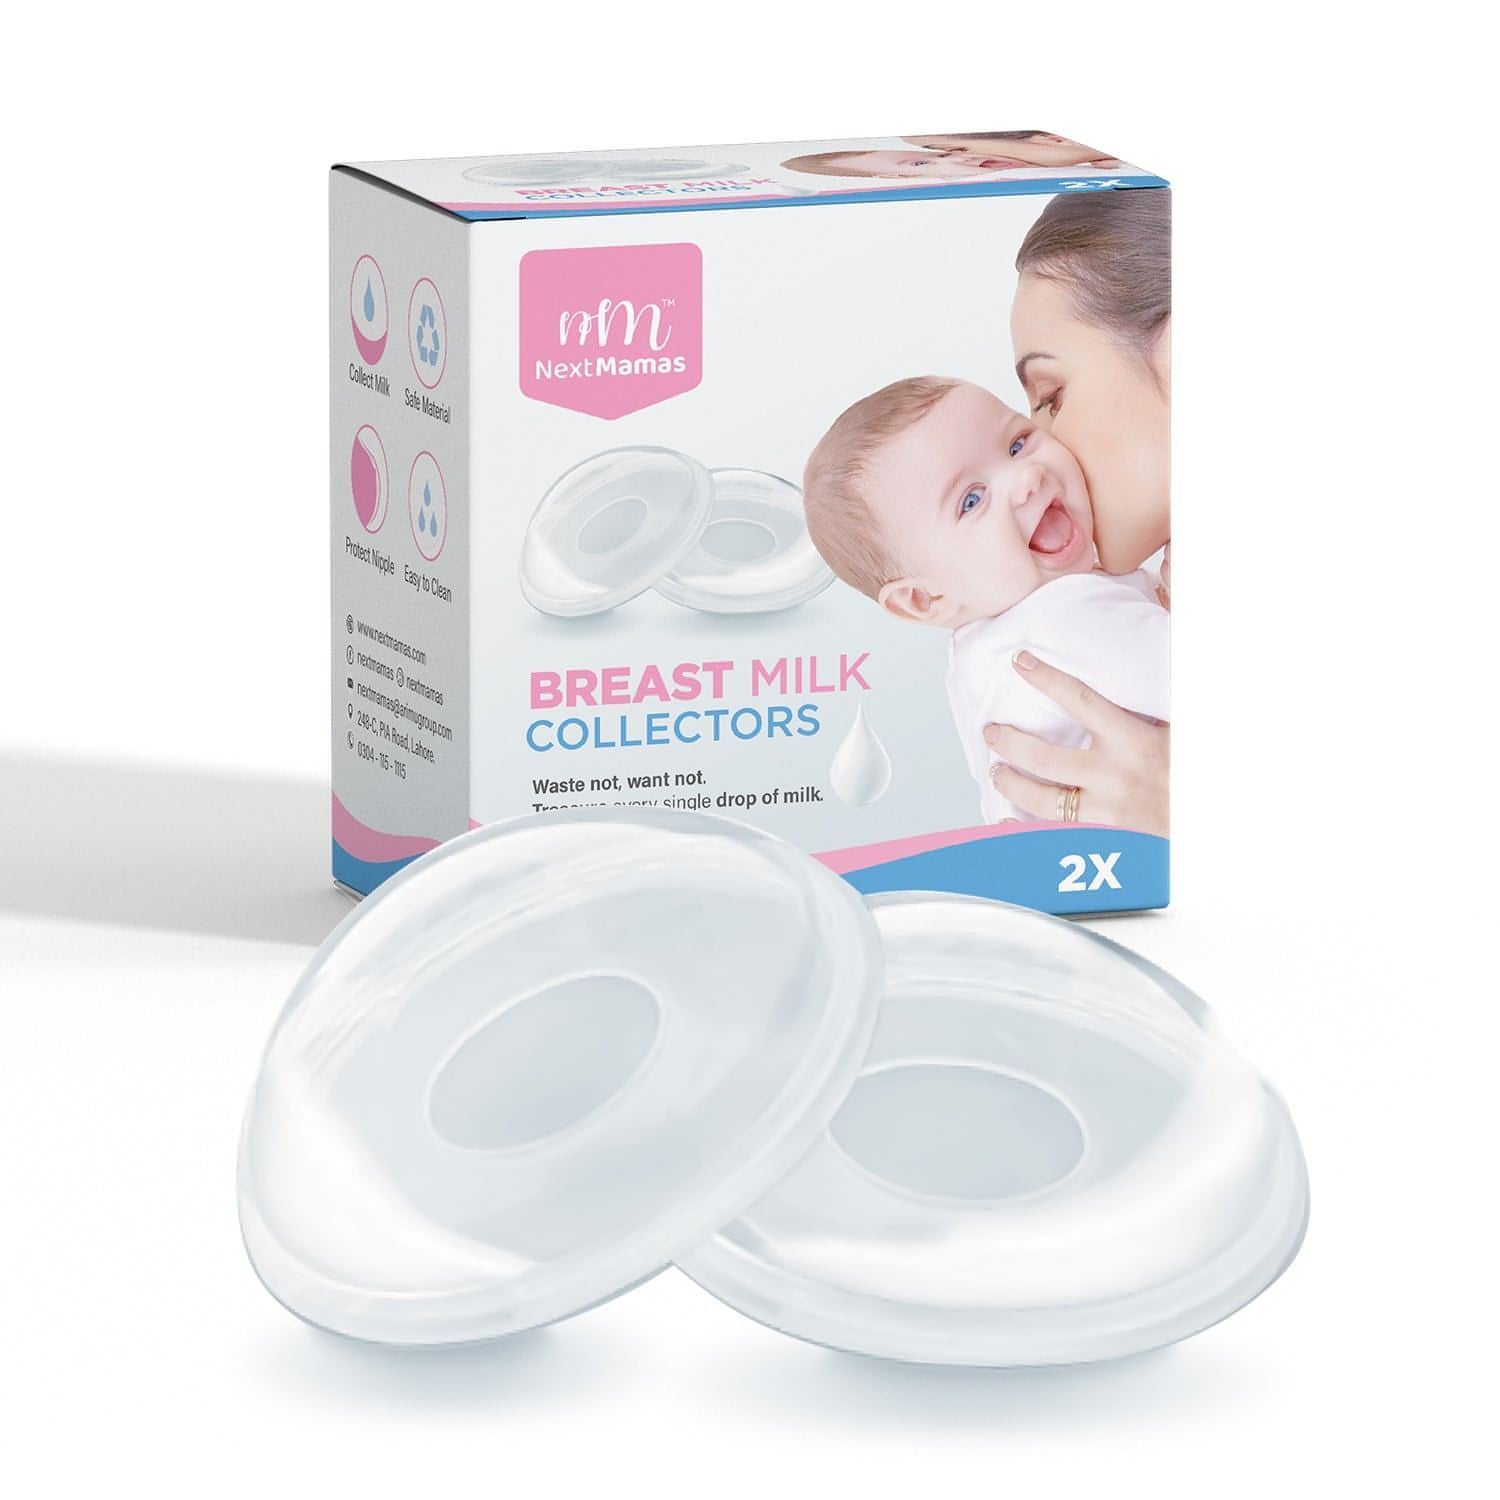 Fairhaven Health Milkies Milk-Saver, Milk Catcher for Breastmilk, Shell to  Collect Leaking Breastmilk, Collector Cup for Nursing & Breastfeeding